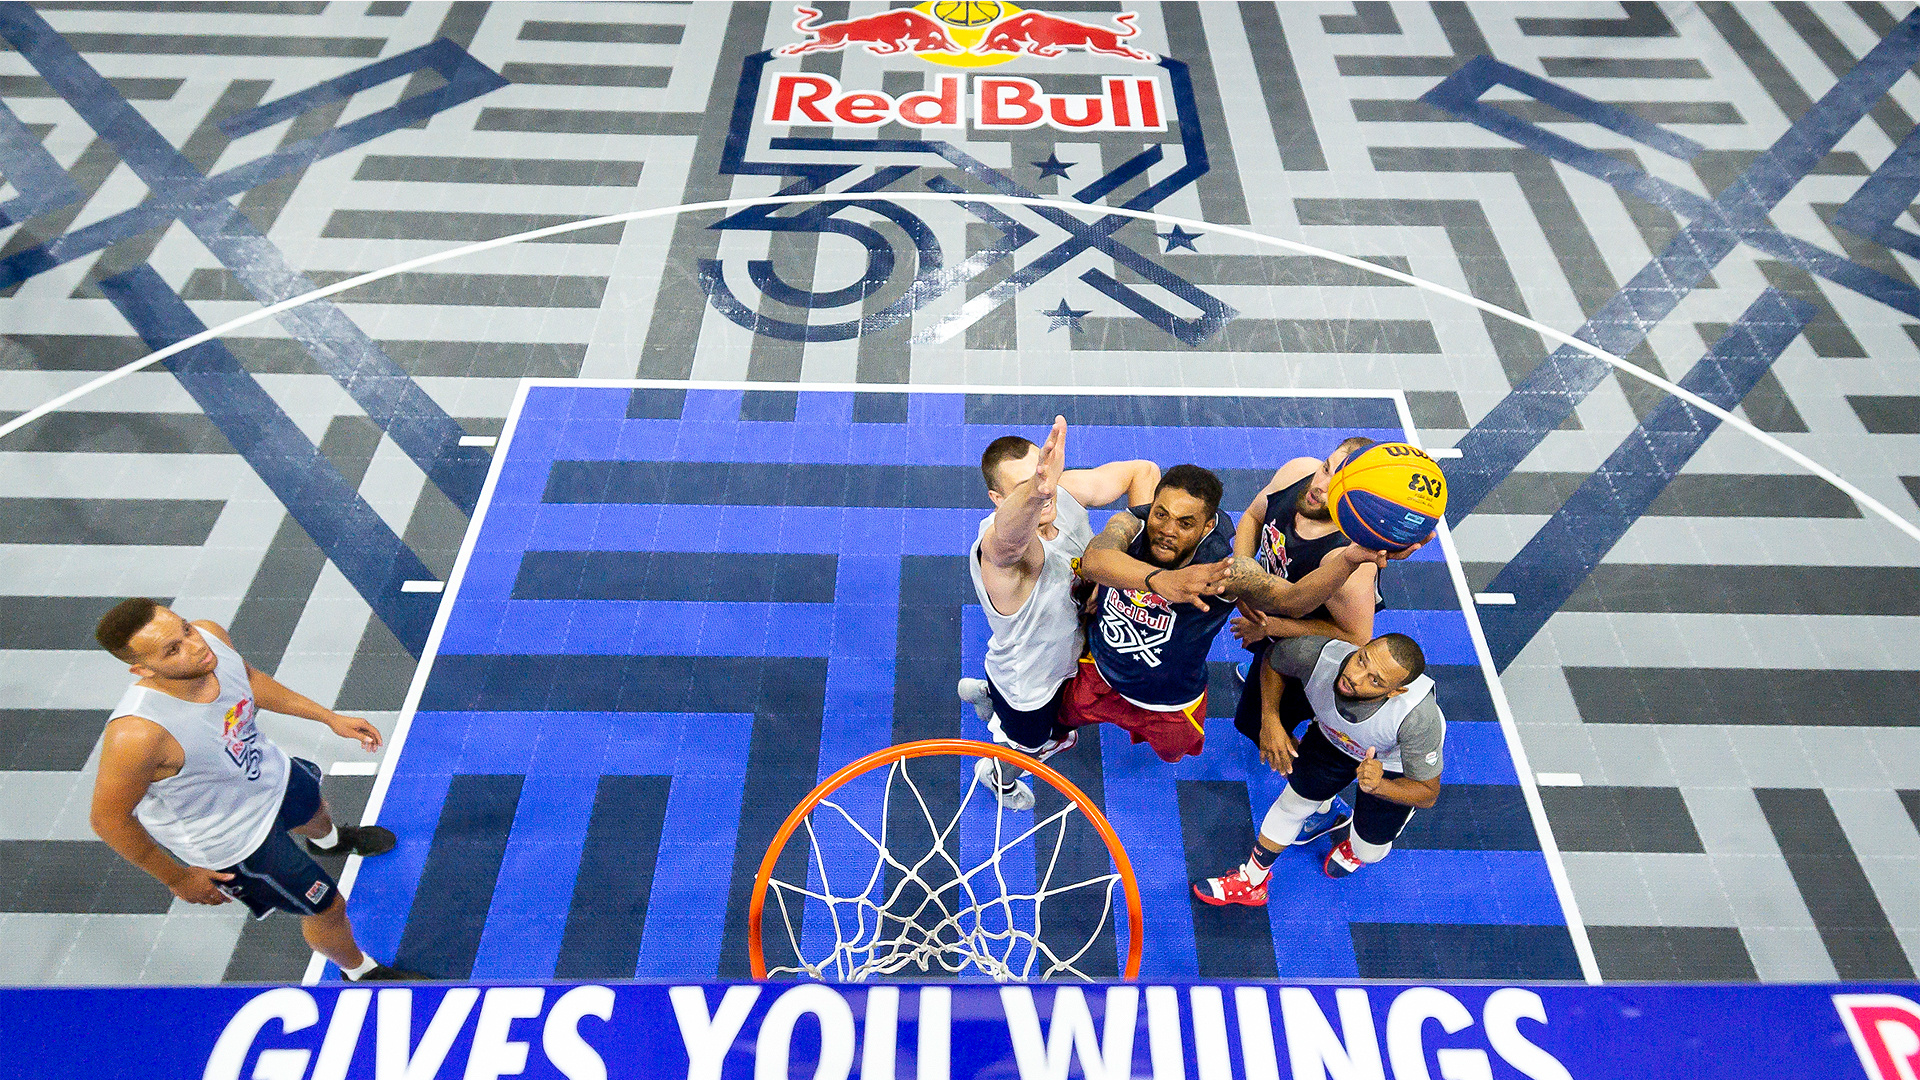 3x3 Basketball, Team Princeton, Back-to-back champs, Red Bull 3x qualifiers, 1920x1080 Full HD Desktop